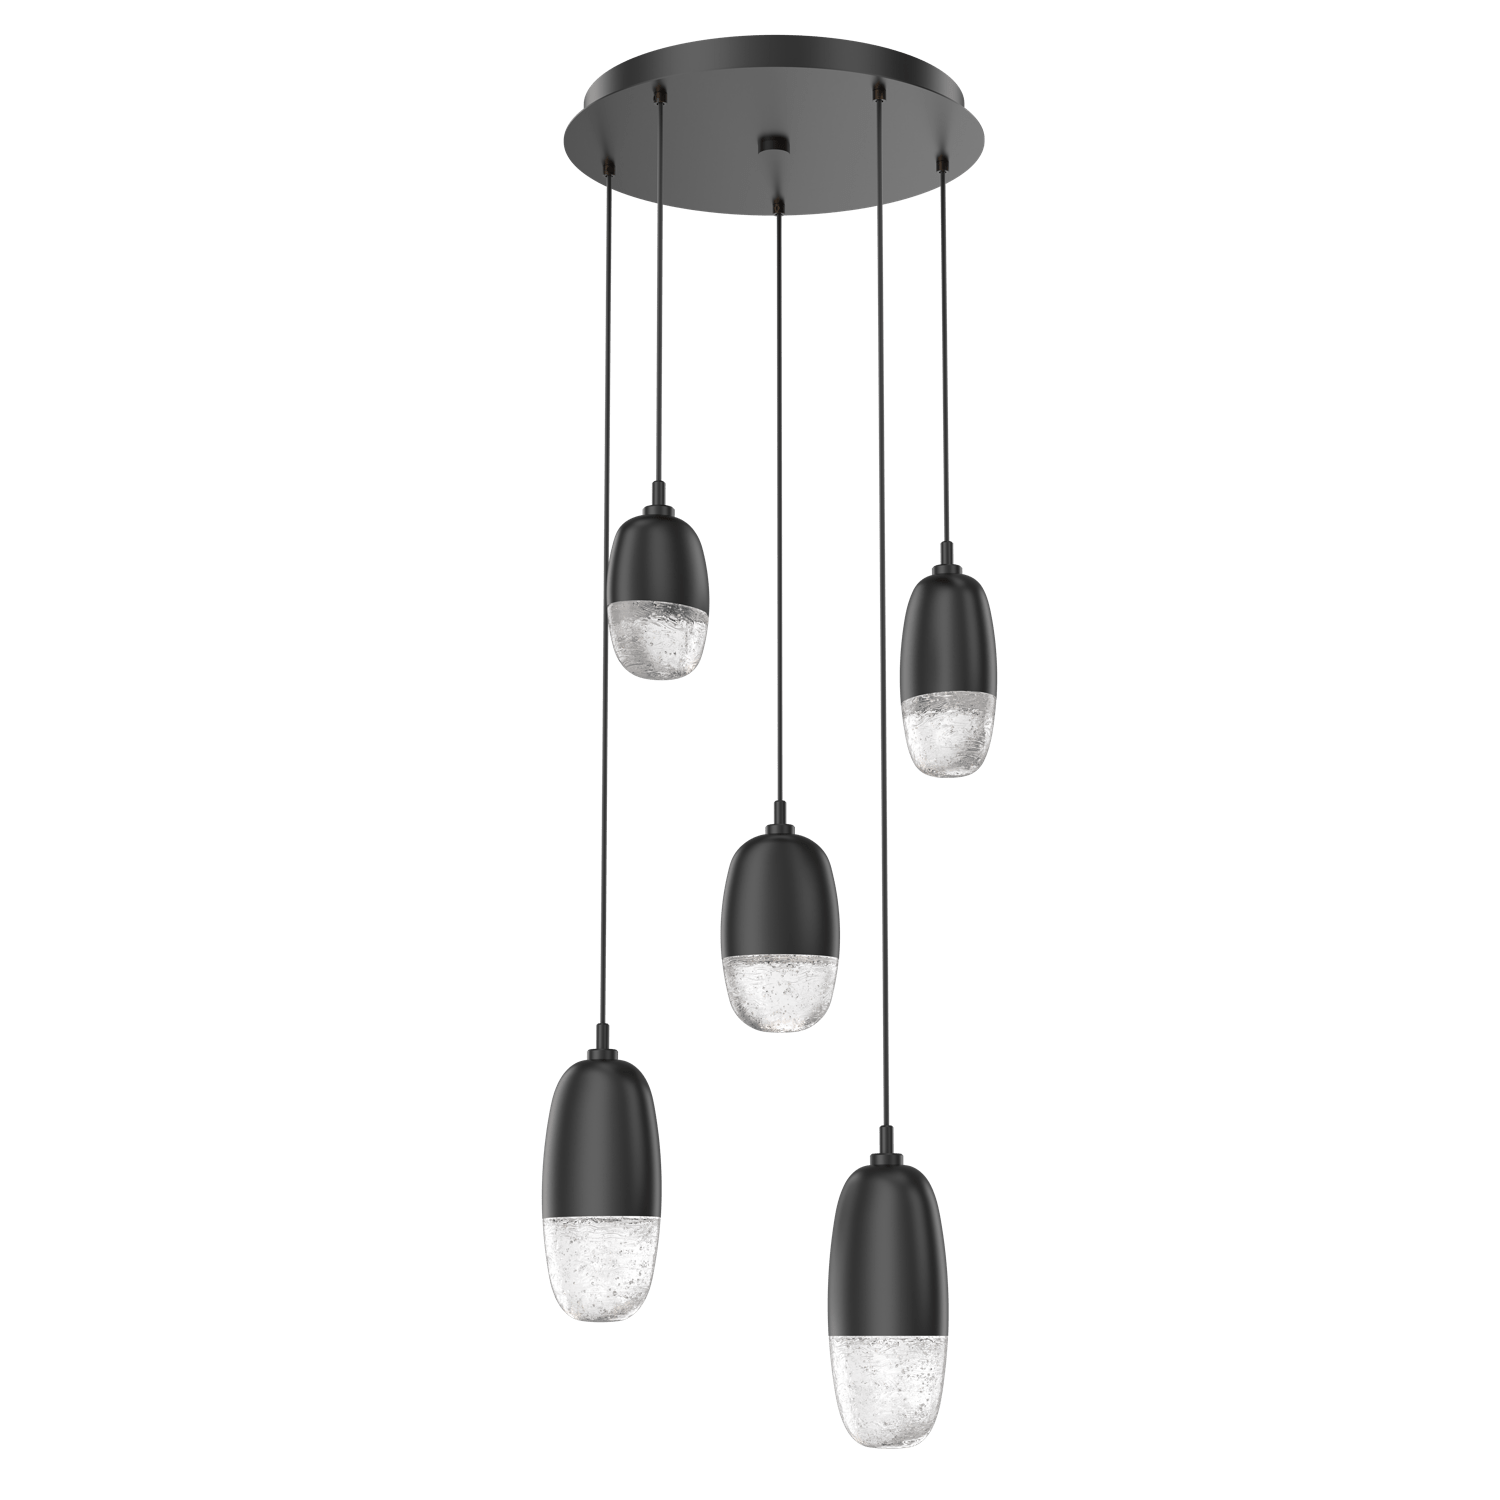 CHB0079-05-MB-Hammerton-Studio-Pebble-5-light-round-pendant-chandelier-with-matte-black-finish-and-clear-cast-glass-shades-and-LED-lamping